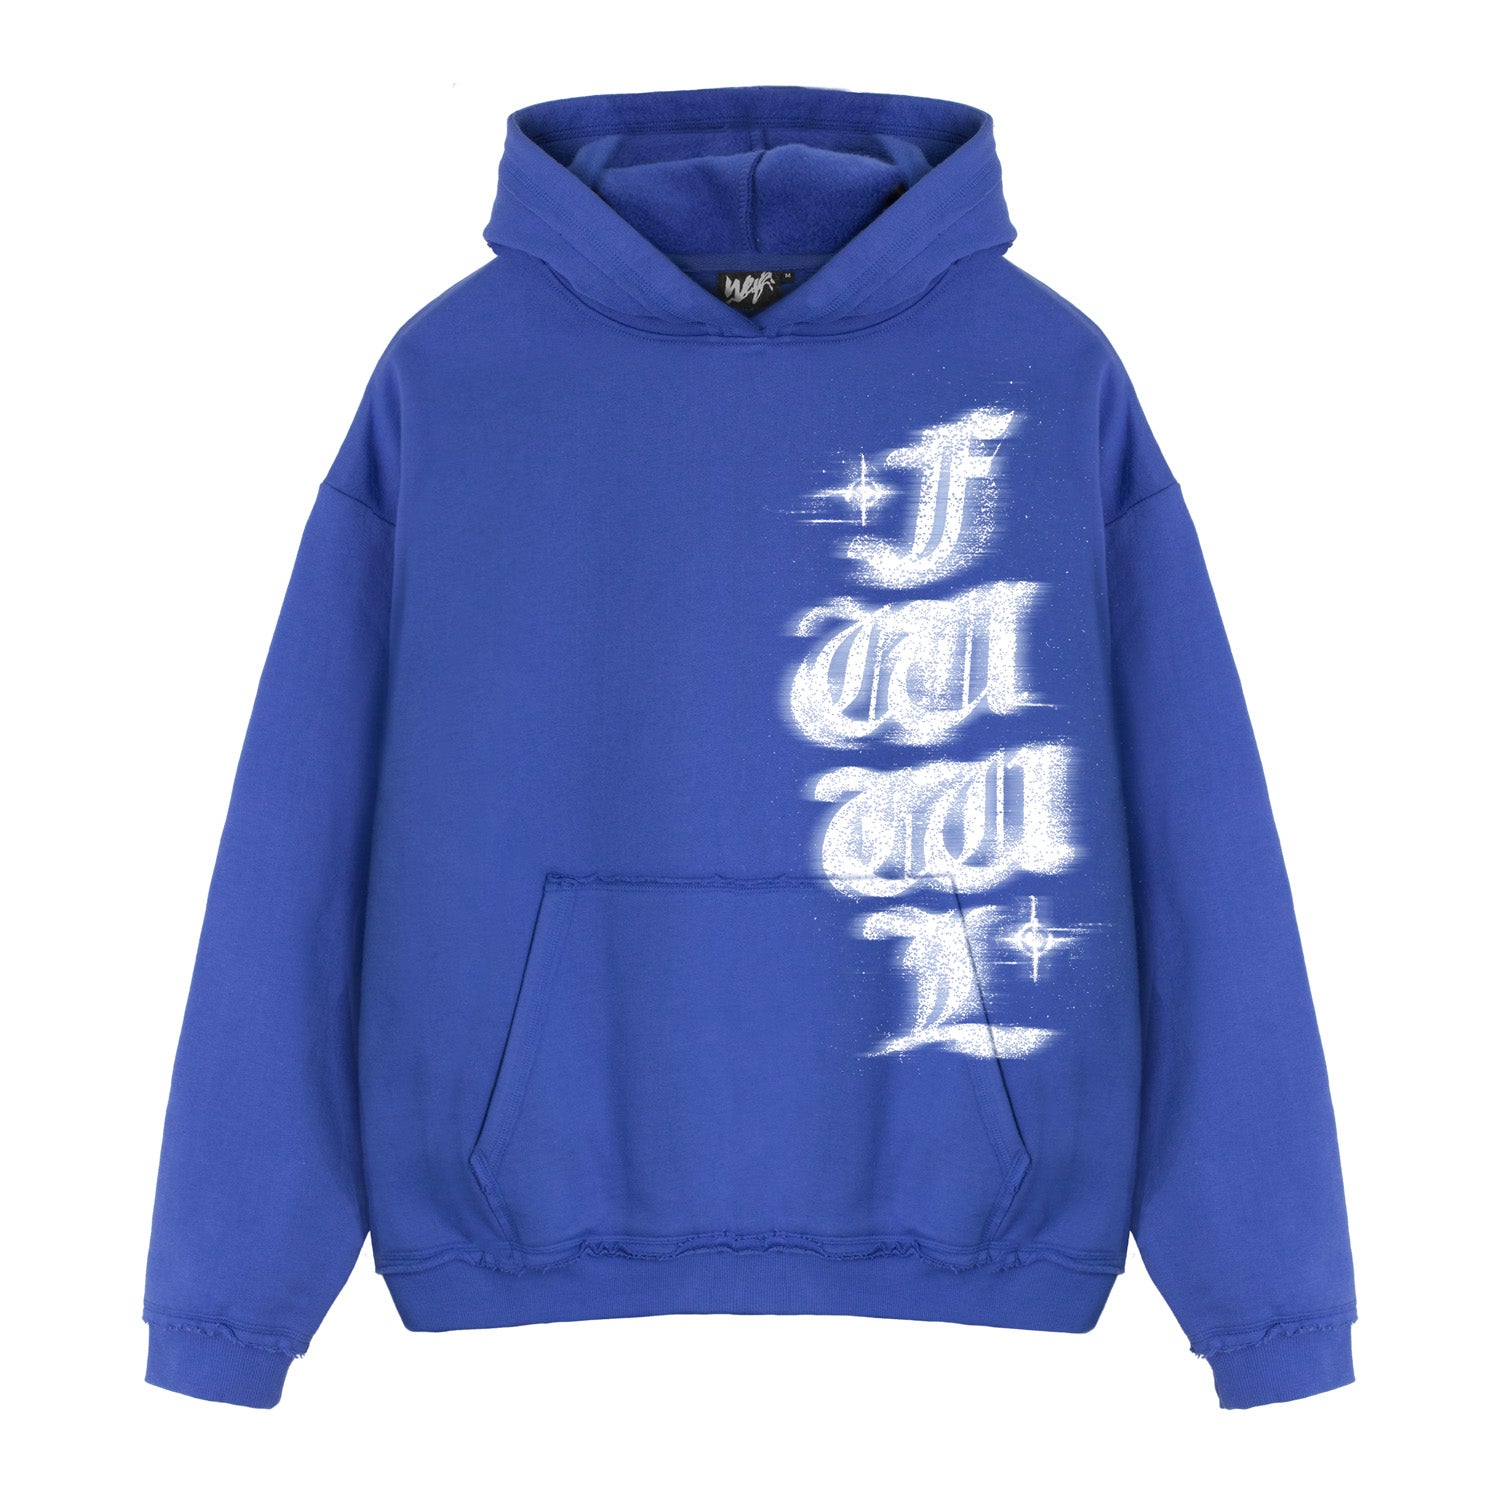 Hoodie oversize "From Weyz with Love" - Blue royal Weyz Clothing